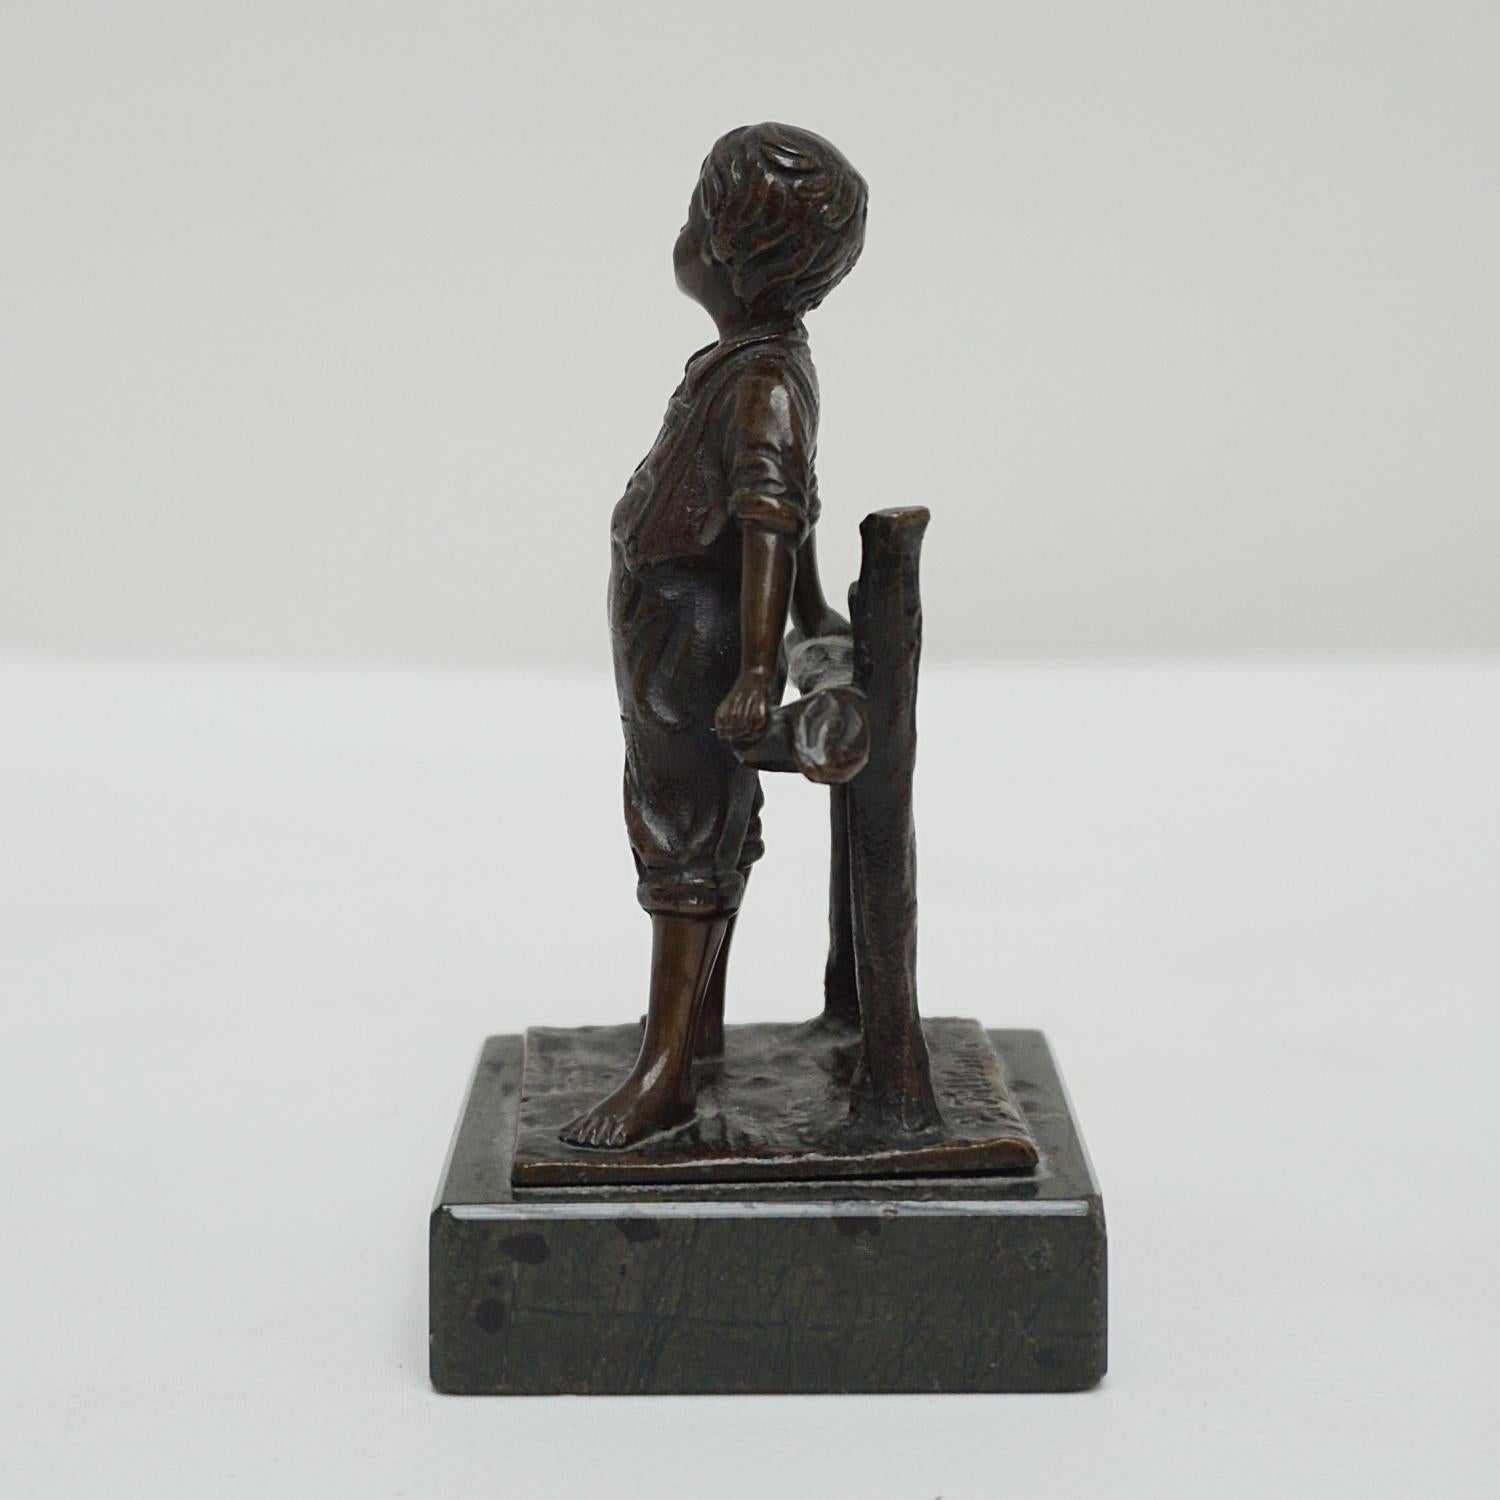 An early 20th century bronze sculpture of a playful young boy leaning against a fence. Set over original black marble base and signed E.Fillbon to bronze. 

Dimensions: H 10cm W 5.5cm D 5.5cm 

Origin: French

Date: circa 1910

Item Number: